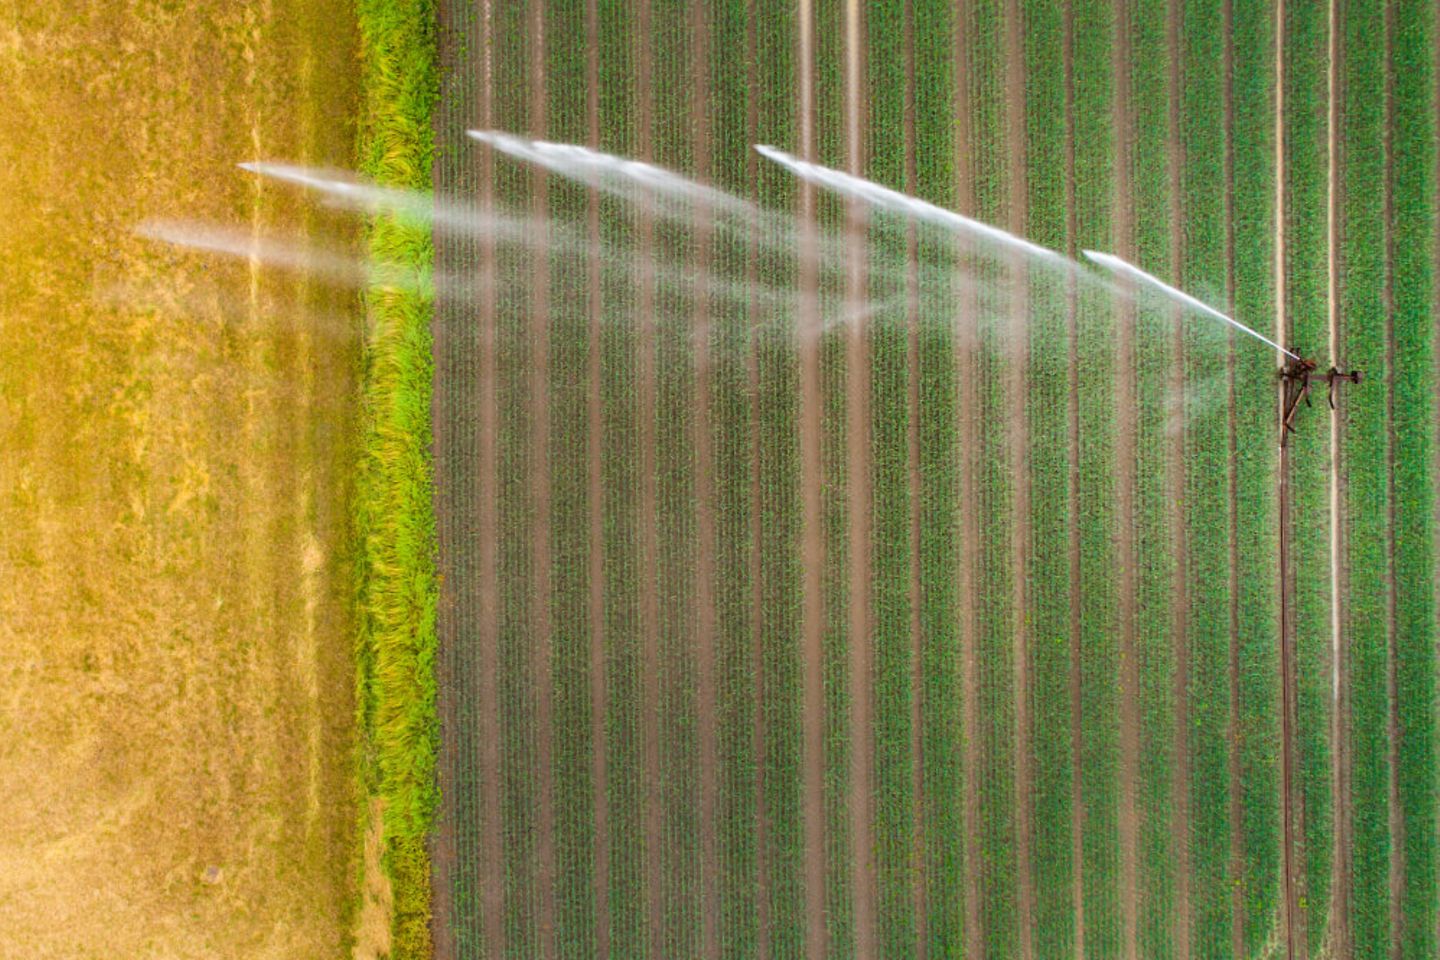 Artificial watering of a wheat field